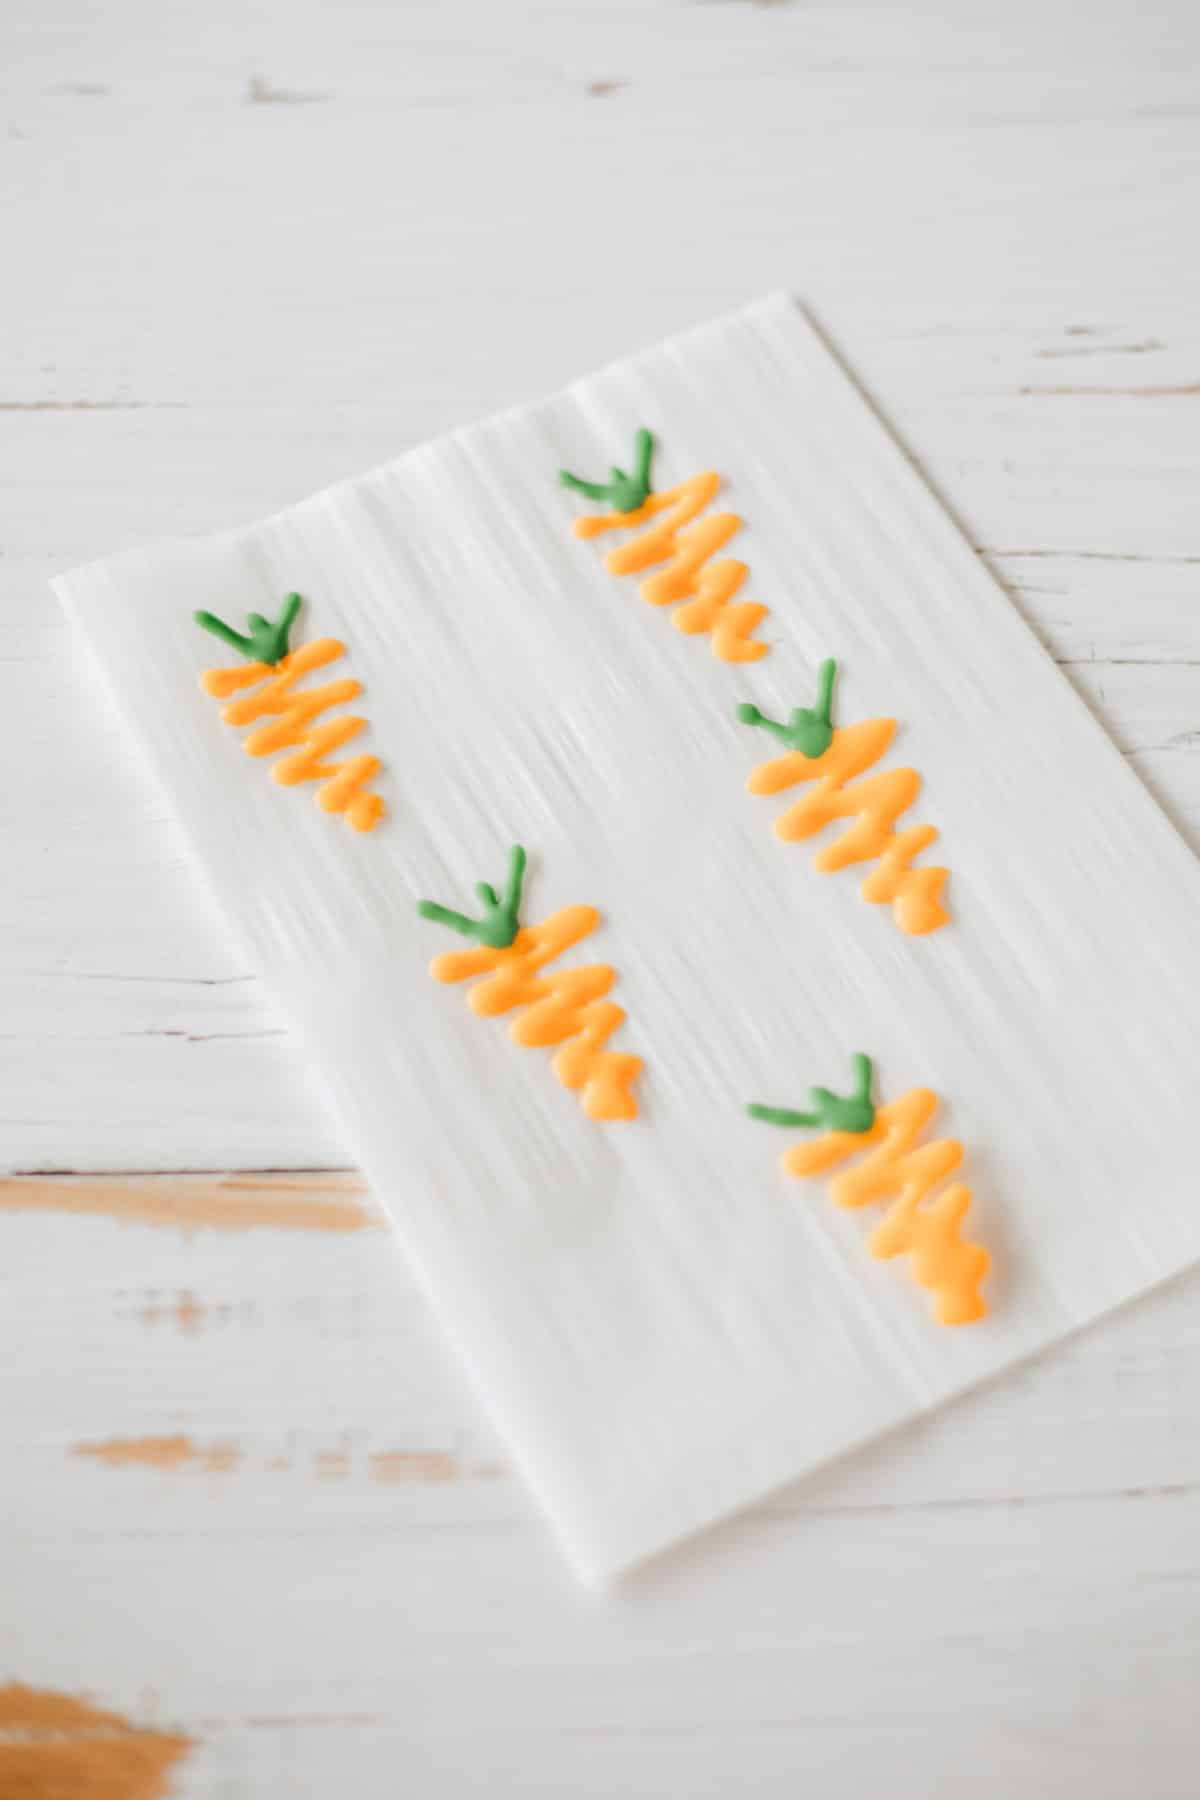 Candy carrot on parchment. 